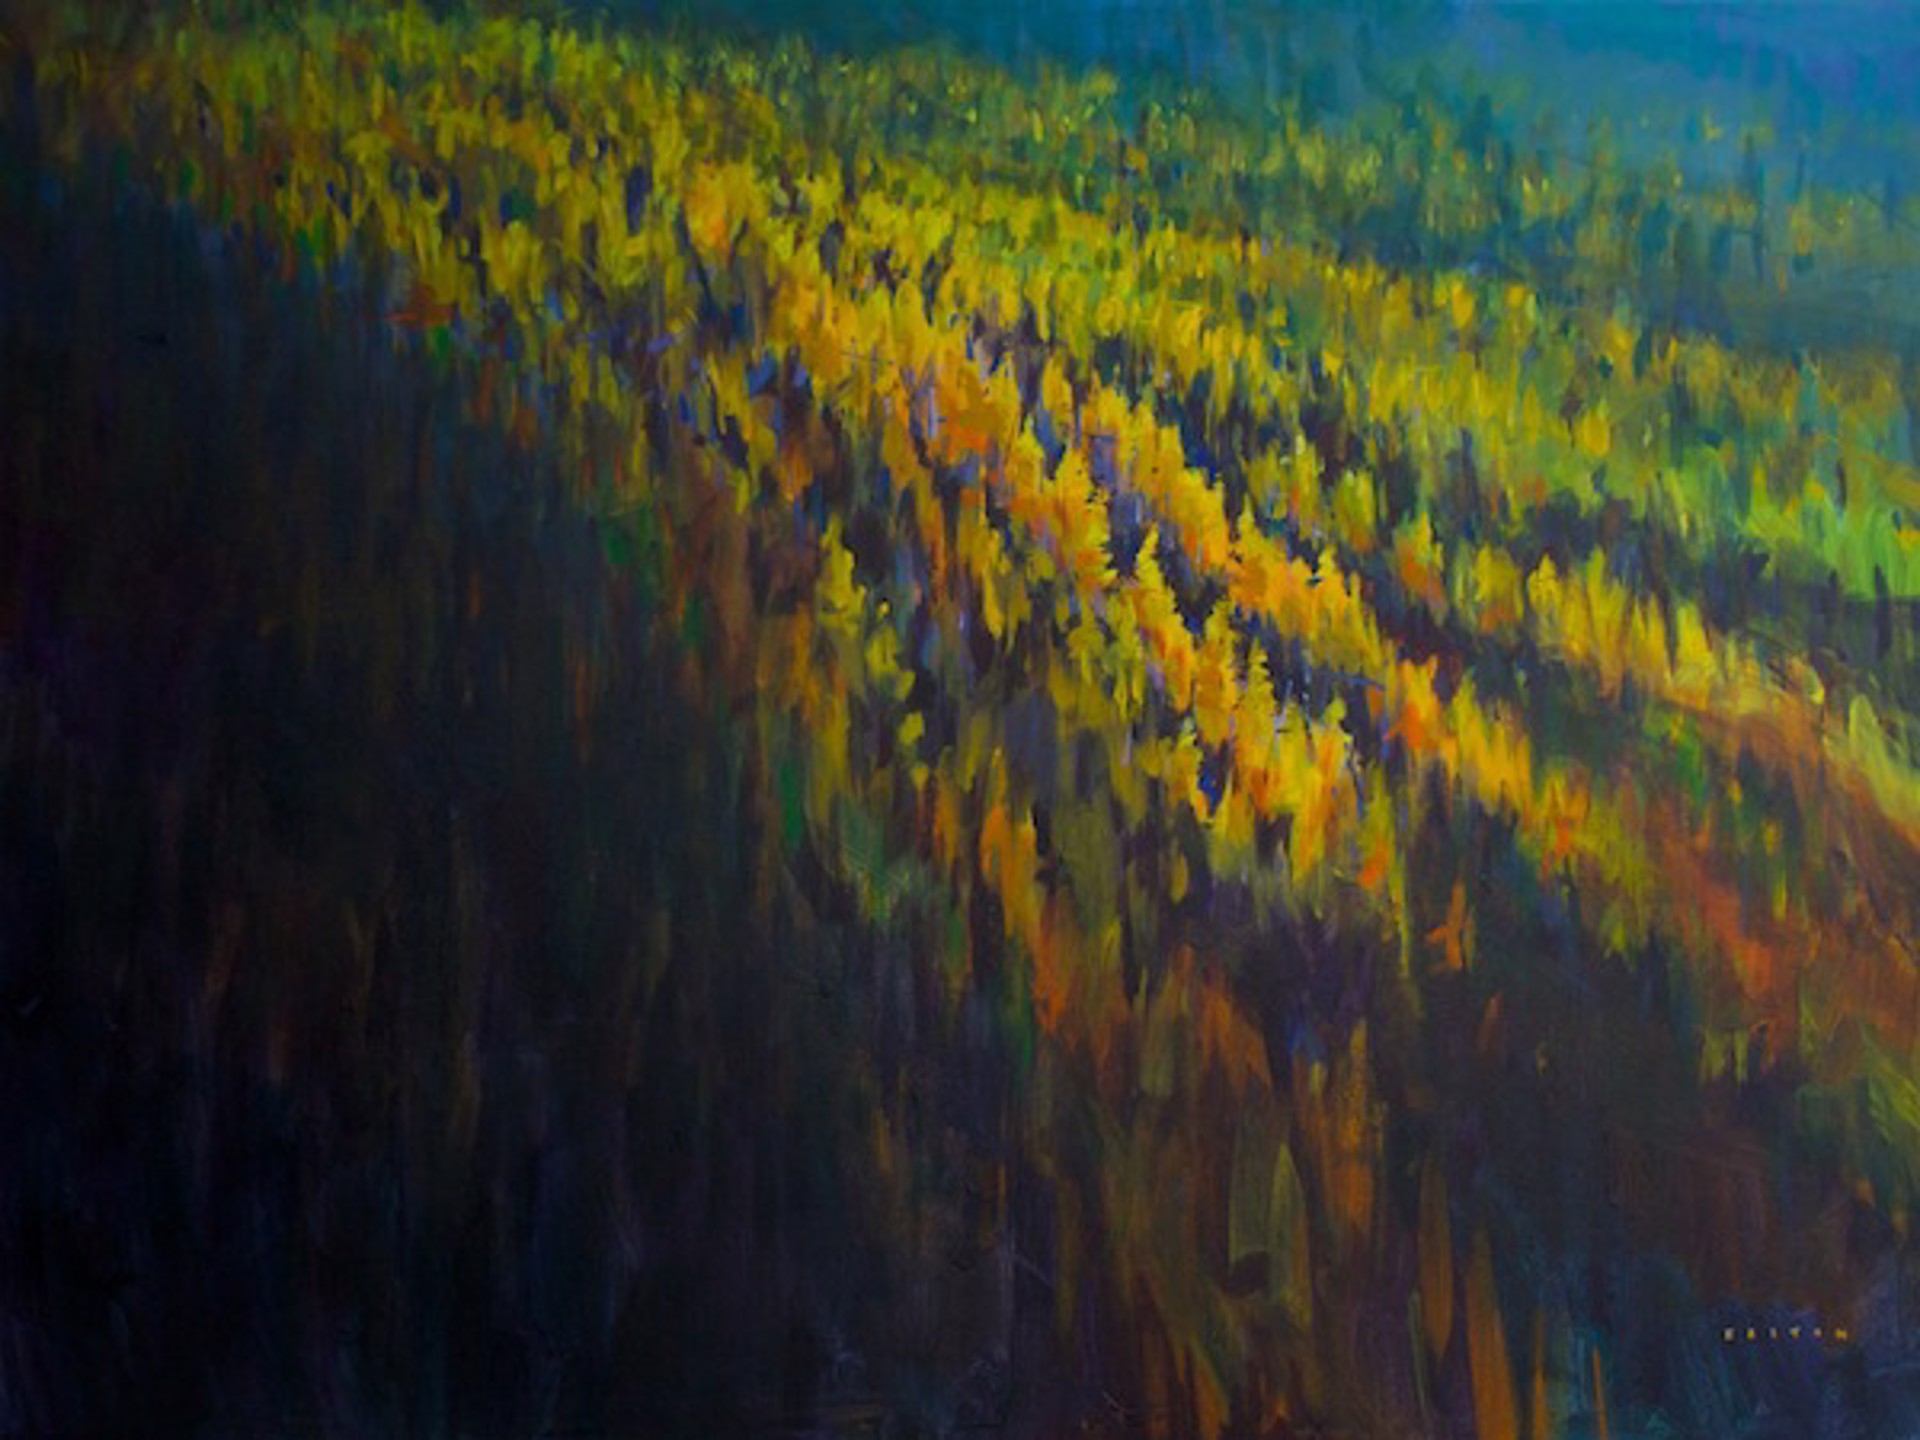 Larch Light Dance by Charlie Easton